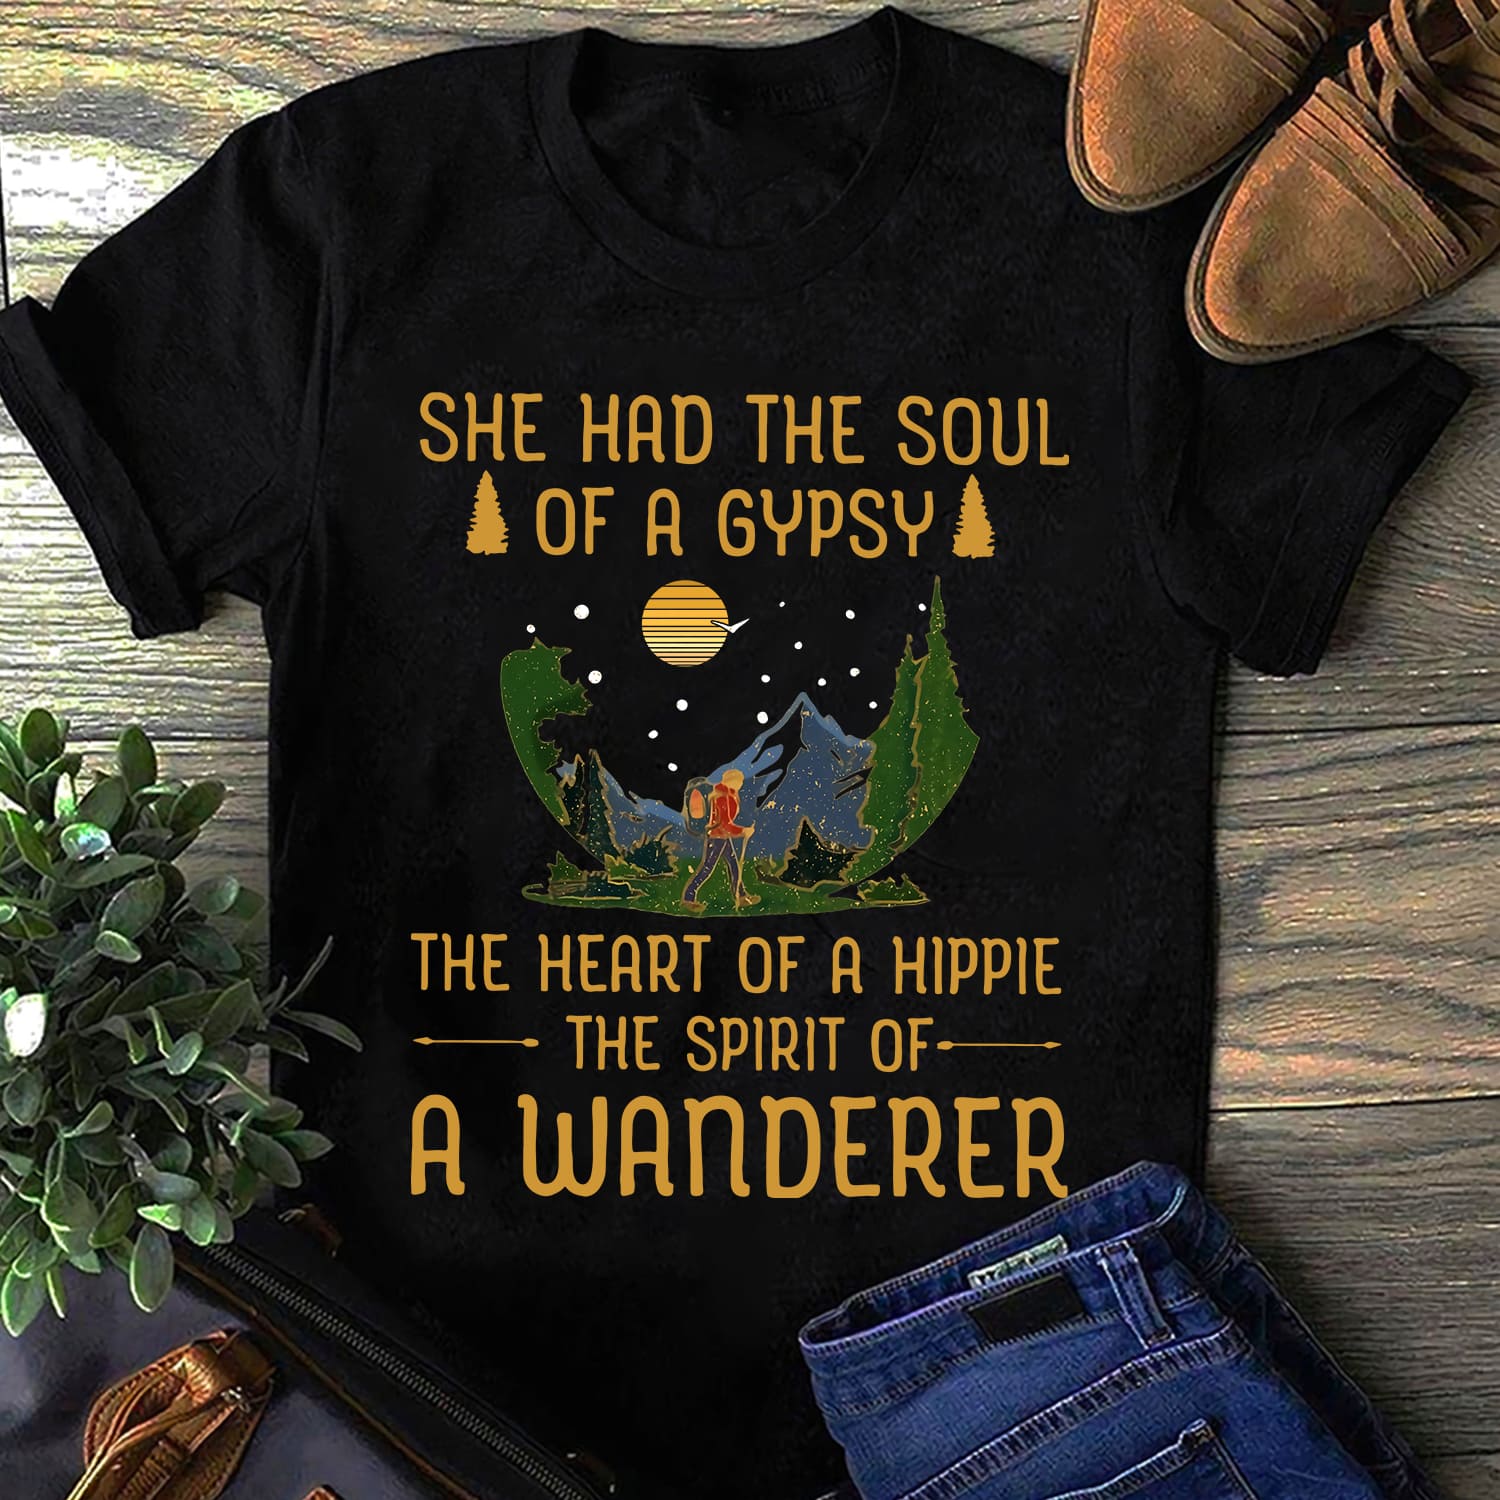 The Mountain Wanderer - She had the soul of a gypsy the heart pf a hippie the spirit of a wanderer